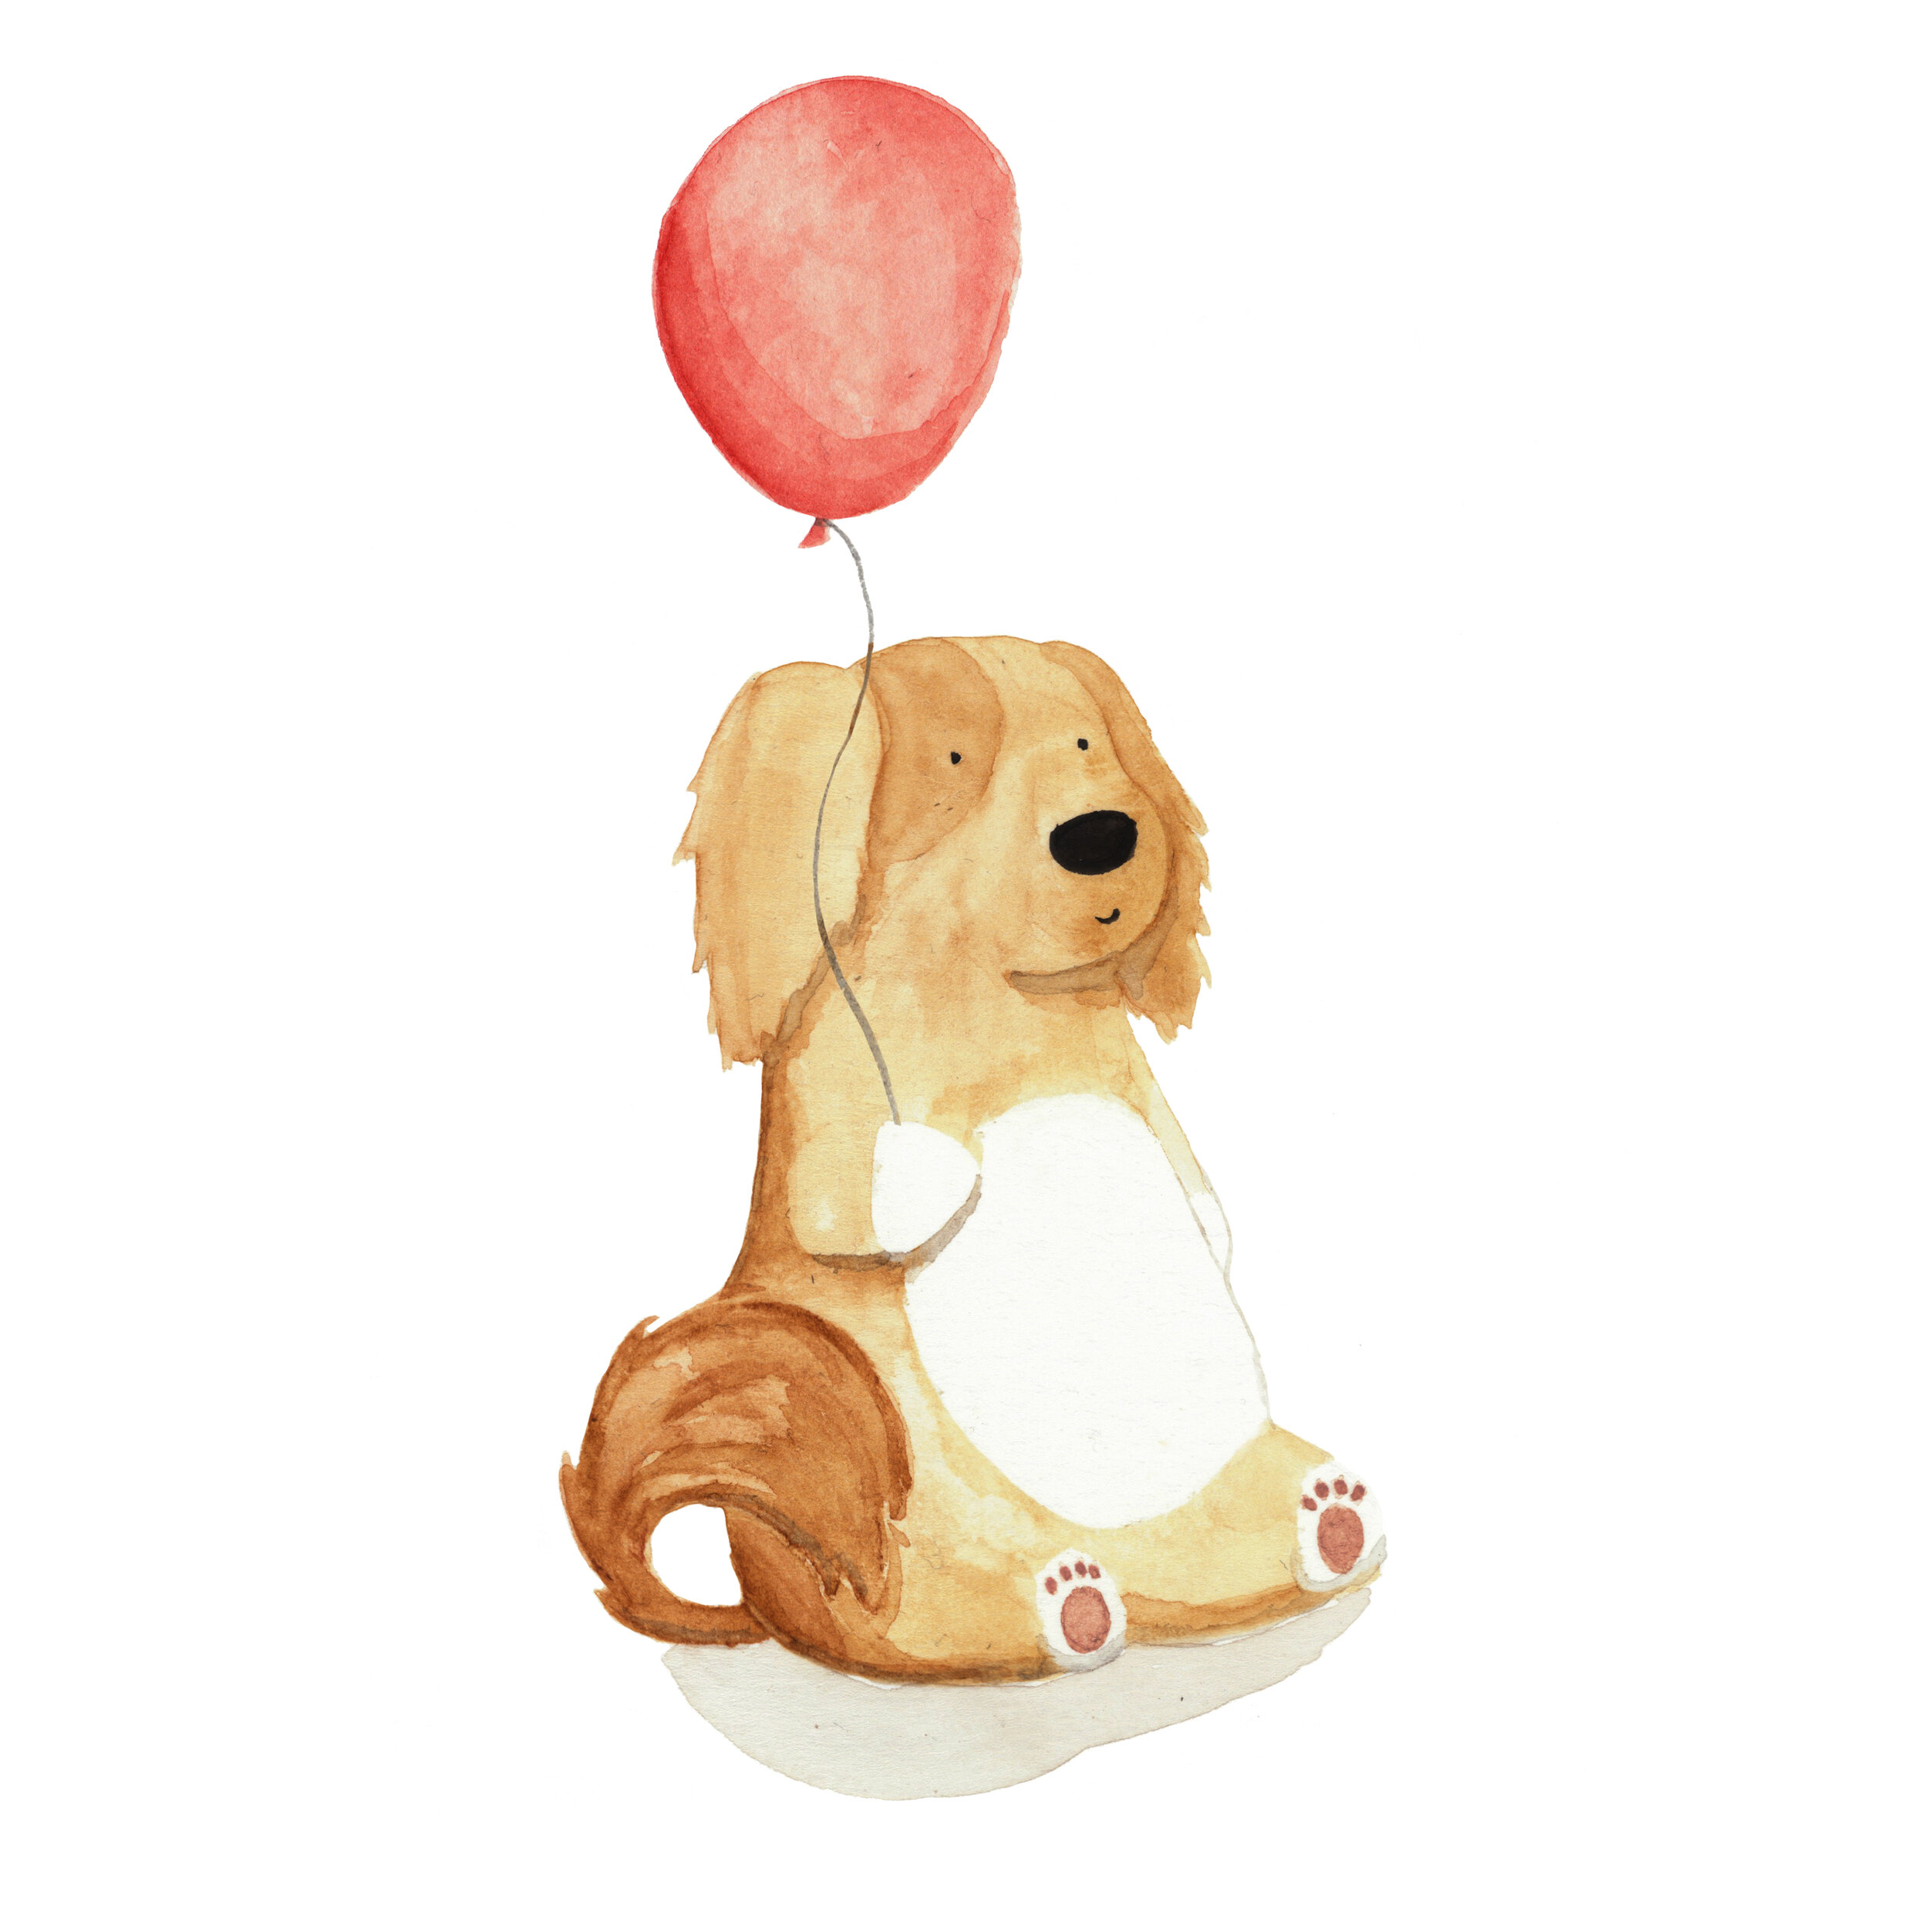 Honey and the Balloon